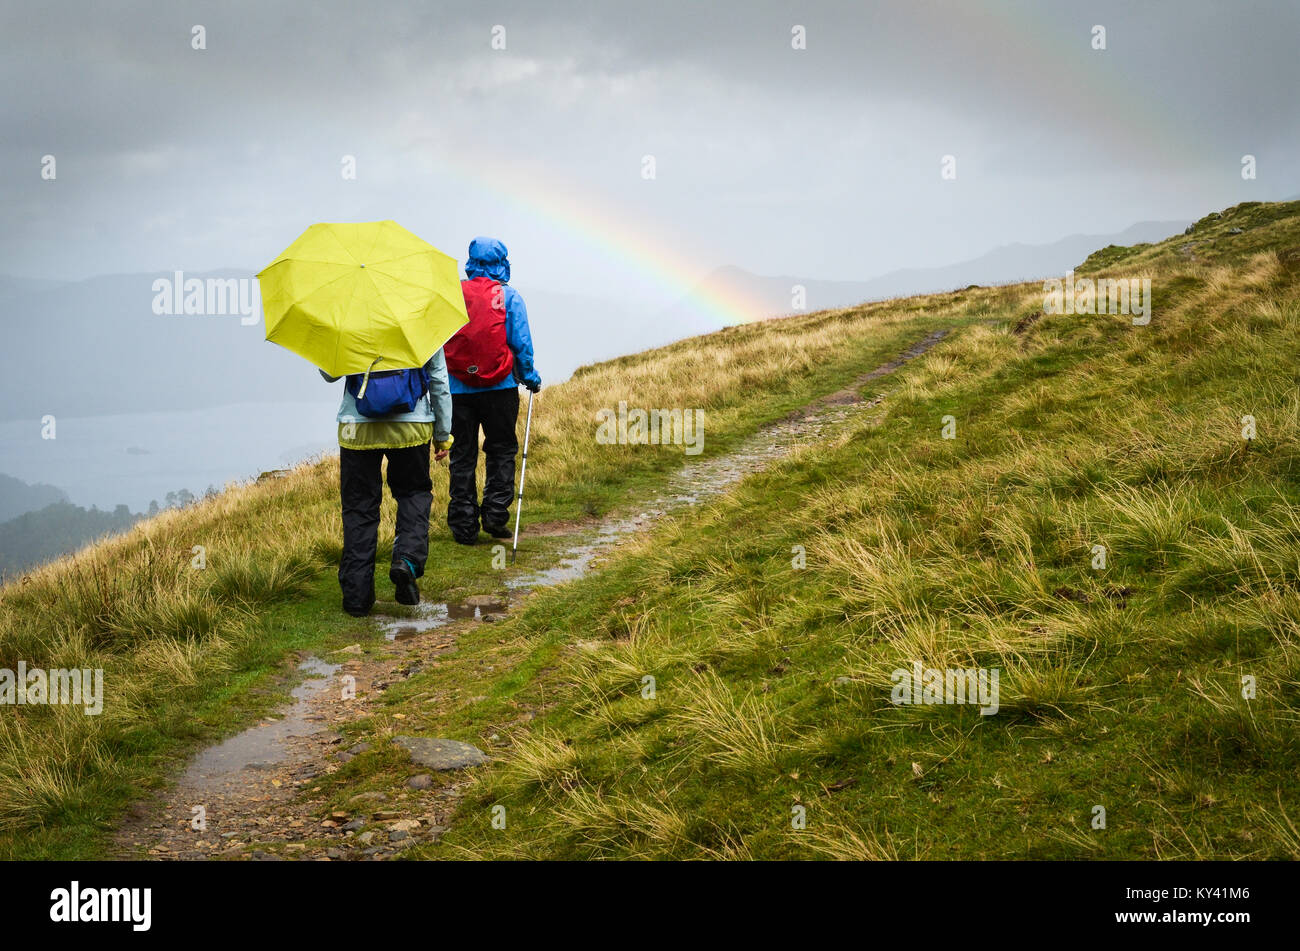 Rainbow, hikers in rain, descending to Patterdale, England, England's Coast to Coast Path, Stock Photo